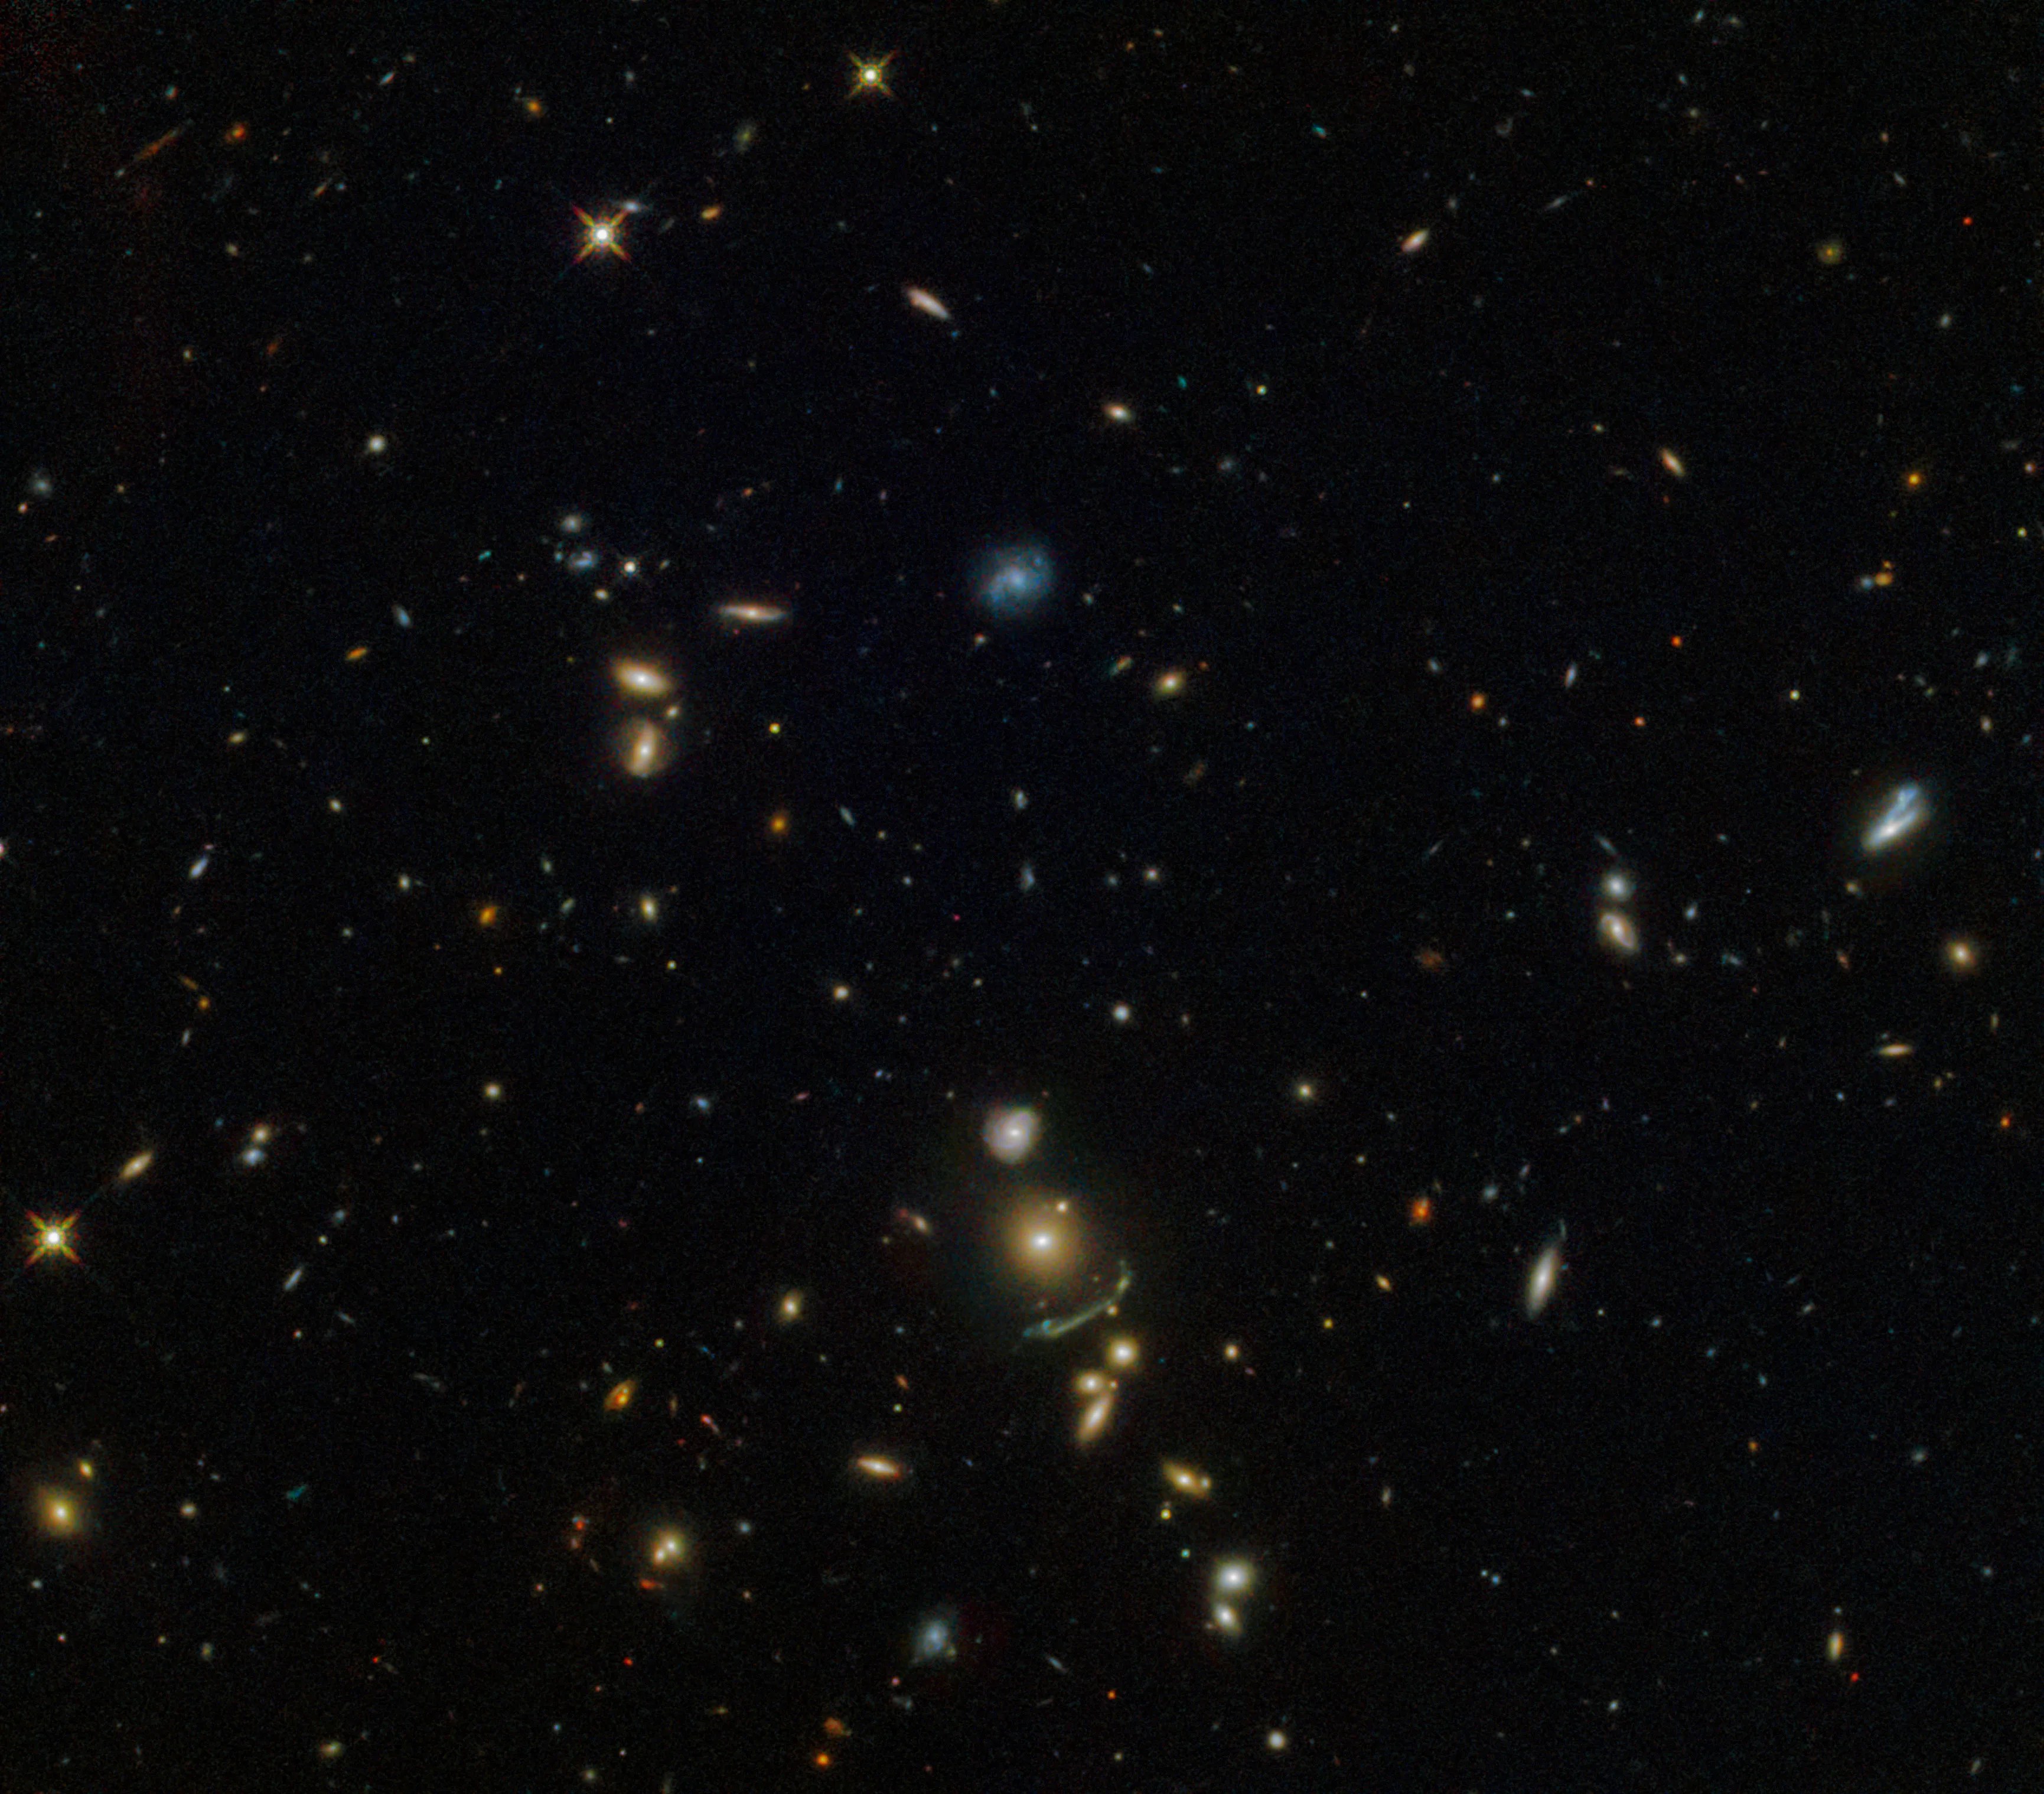 A smattering of galaxies of all shapes and colors